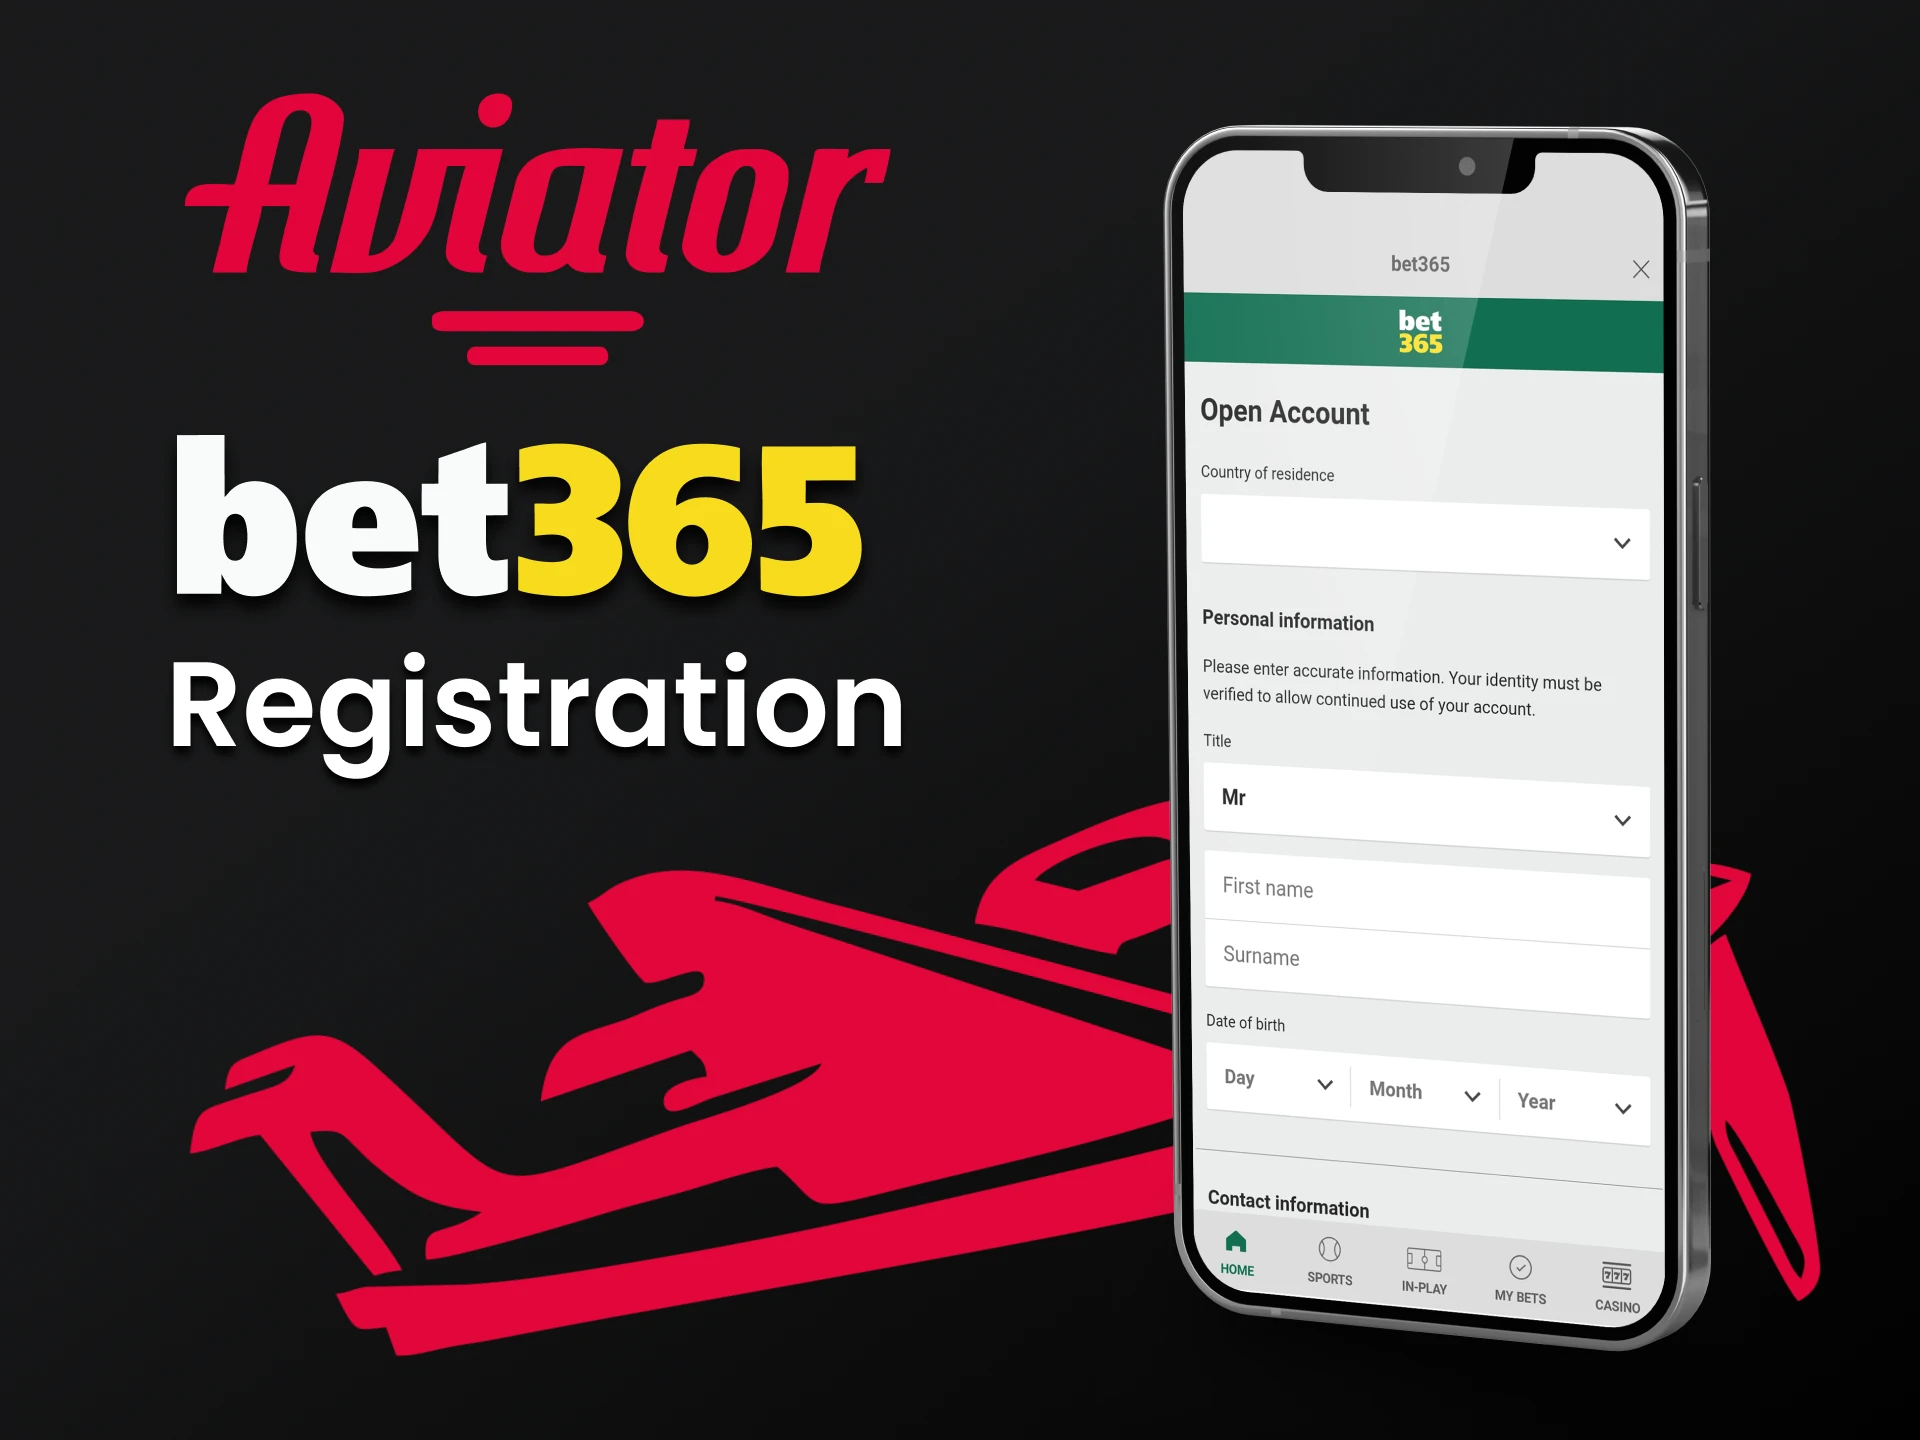 Register in the Bet365 application to play Aviator.